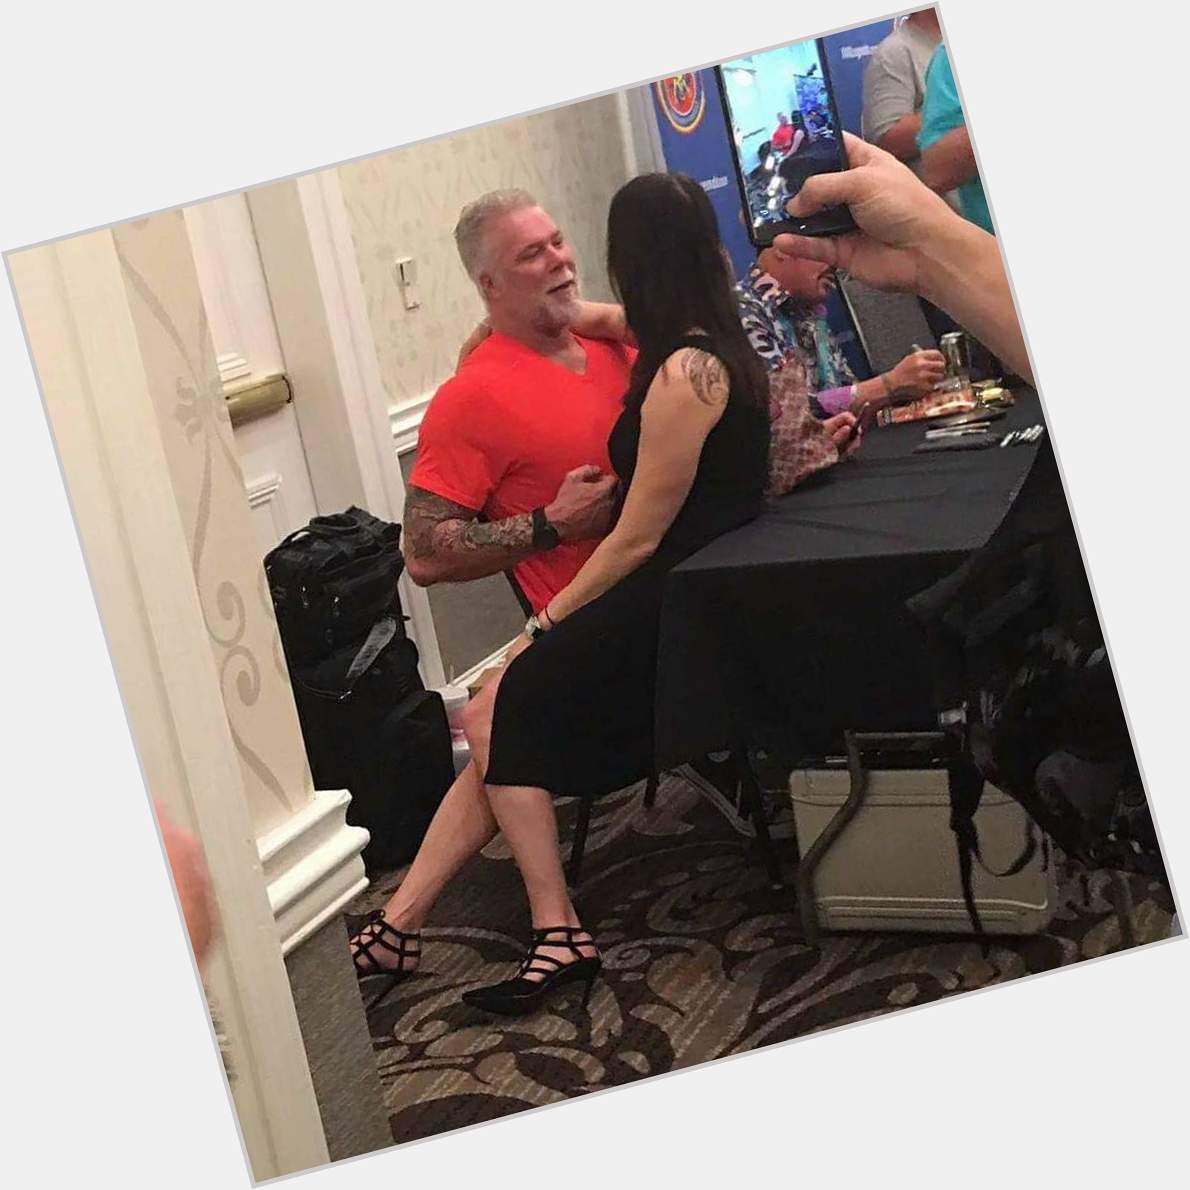 Chyna reunited with long time friend, Happy Birthday to WWE Hall of Famer Kevin Nash Angie TeamChyna 